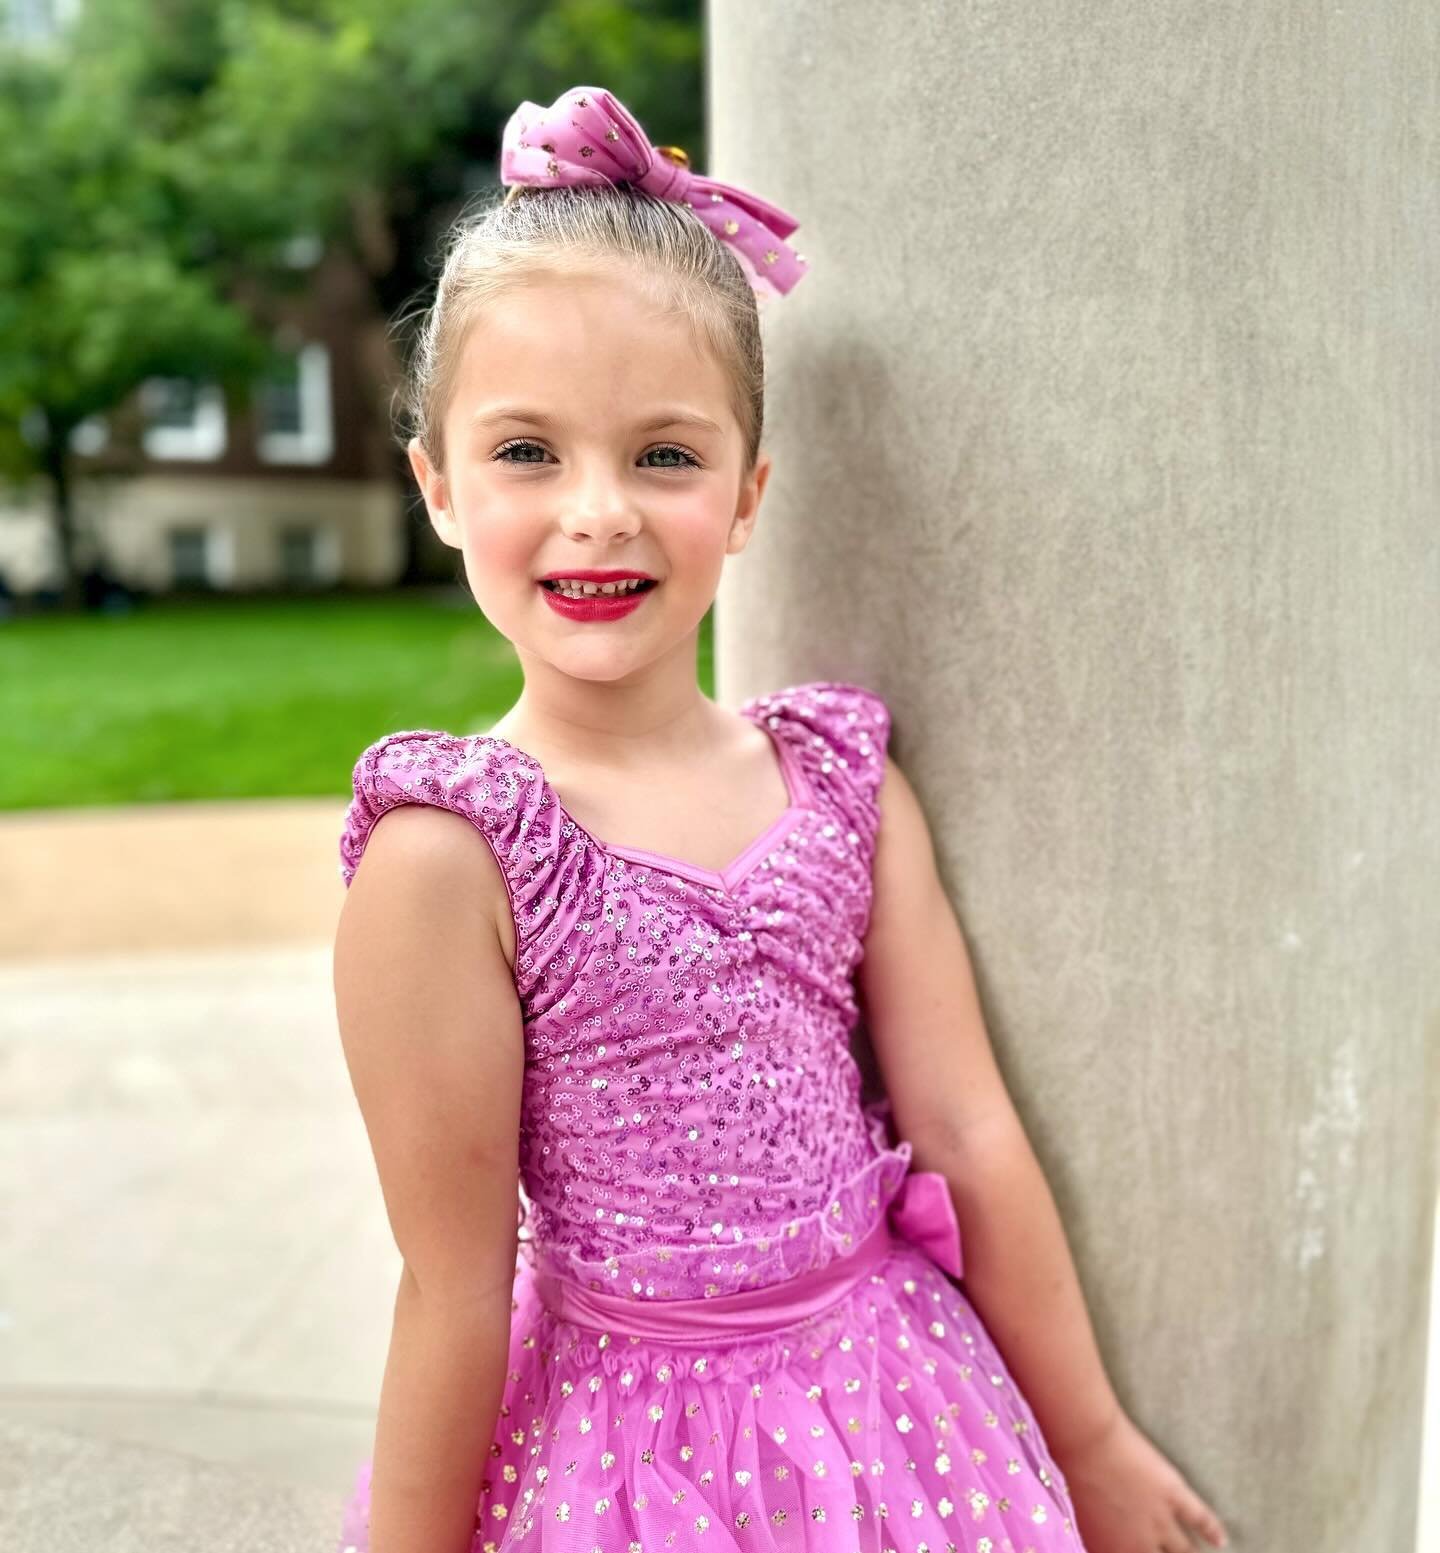 Emmie Sue takes the stage! Her smiles say it all, she loved every minute! A dream come true to watch my tiny dancer. So proud! 🩰⭐️

Grateful the friends and love she has at @lakehighlandsdanceacademy! Blown away by the show ❣️